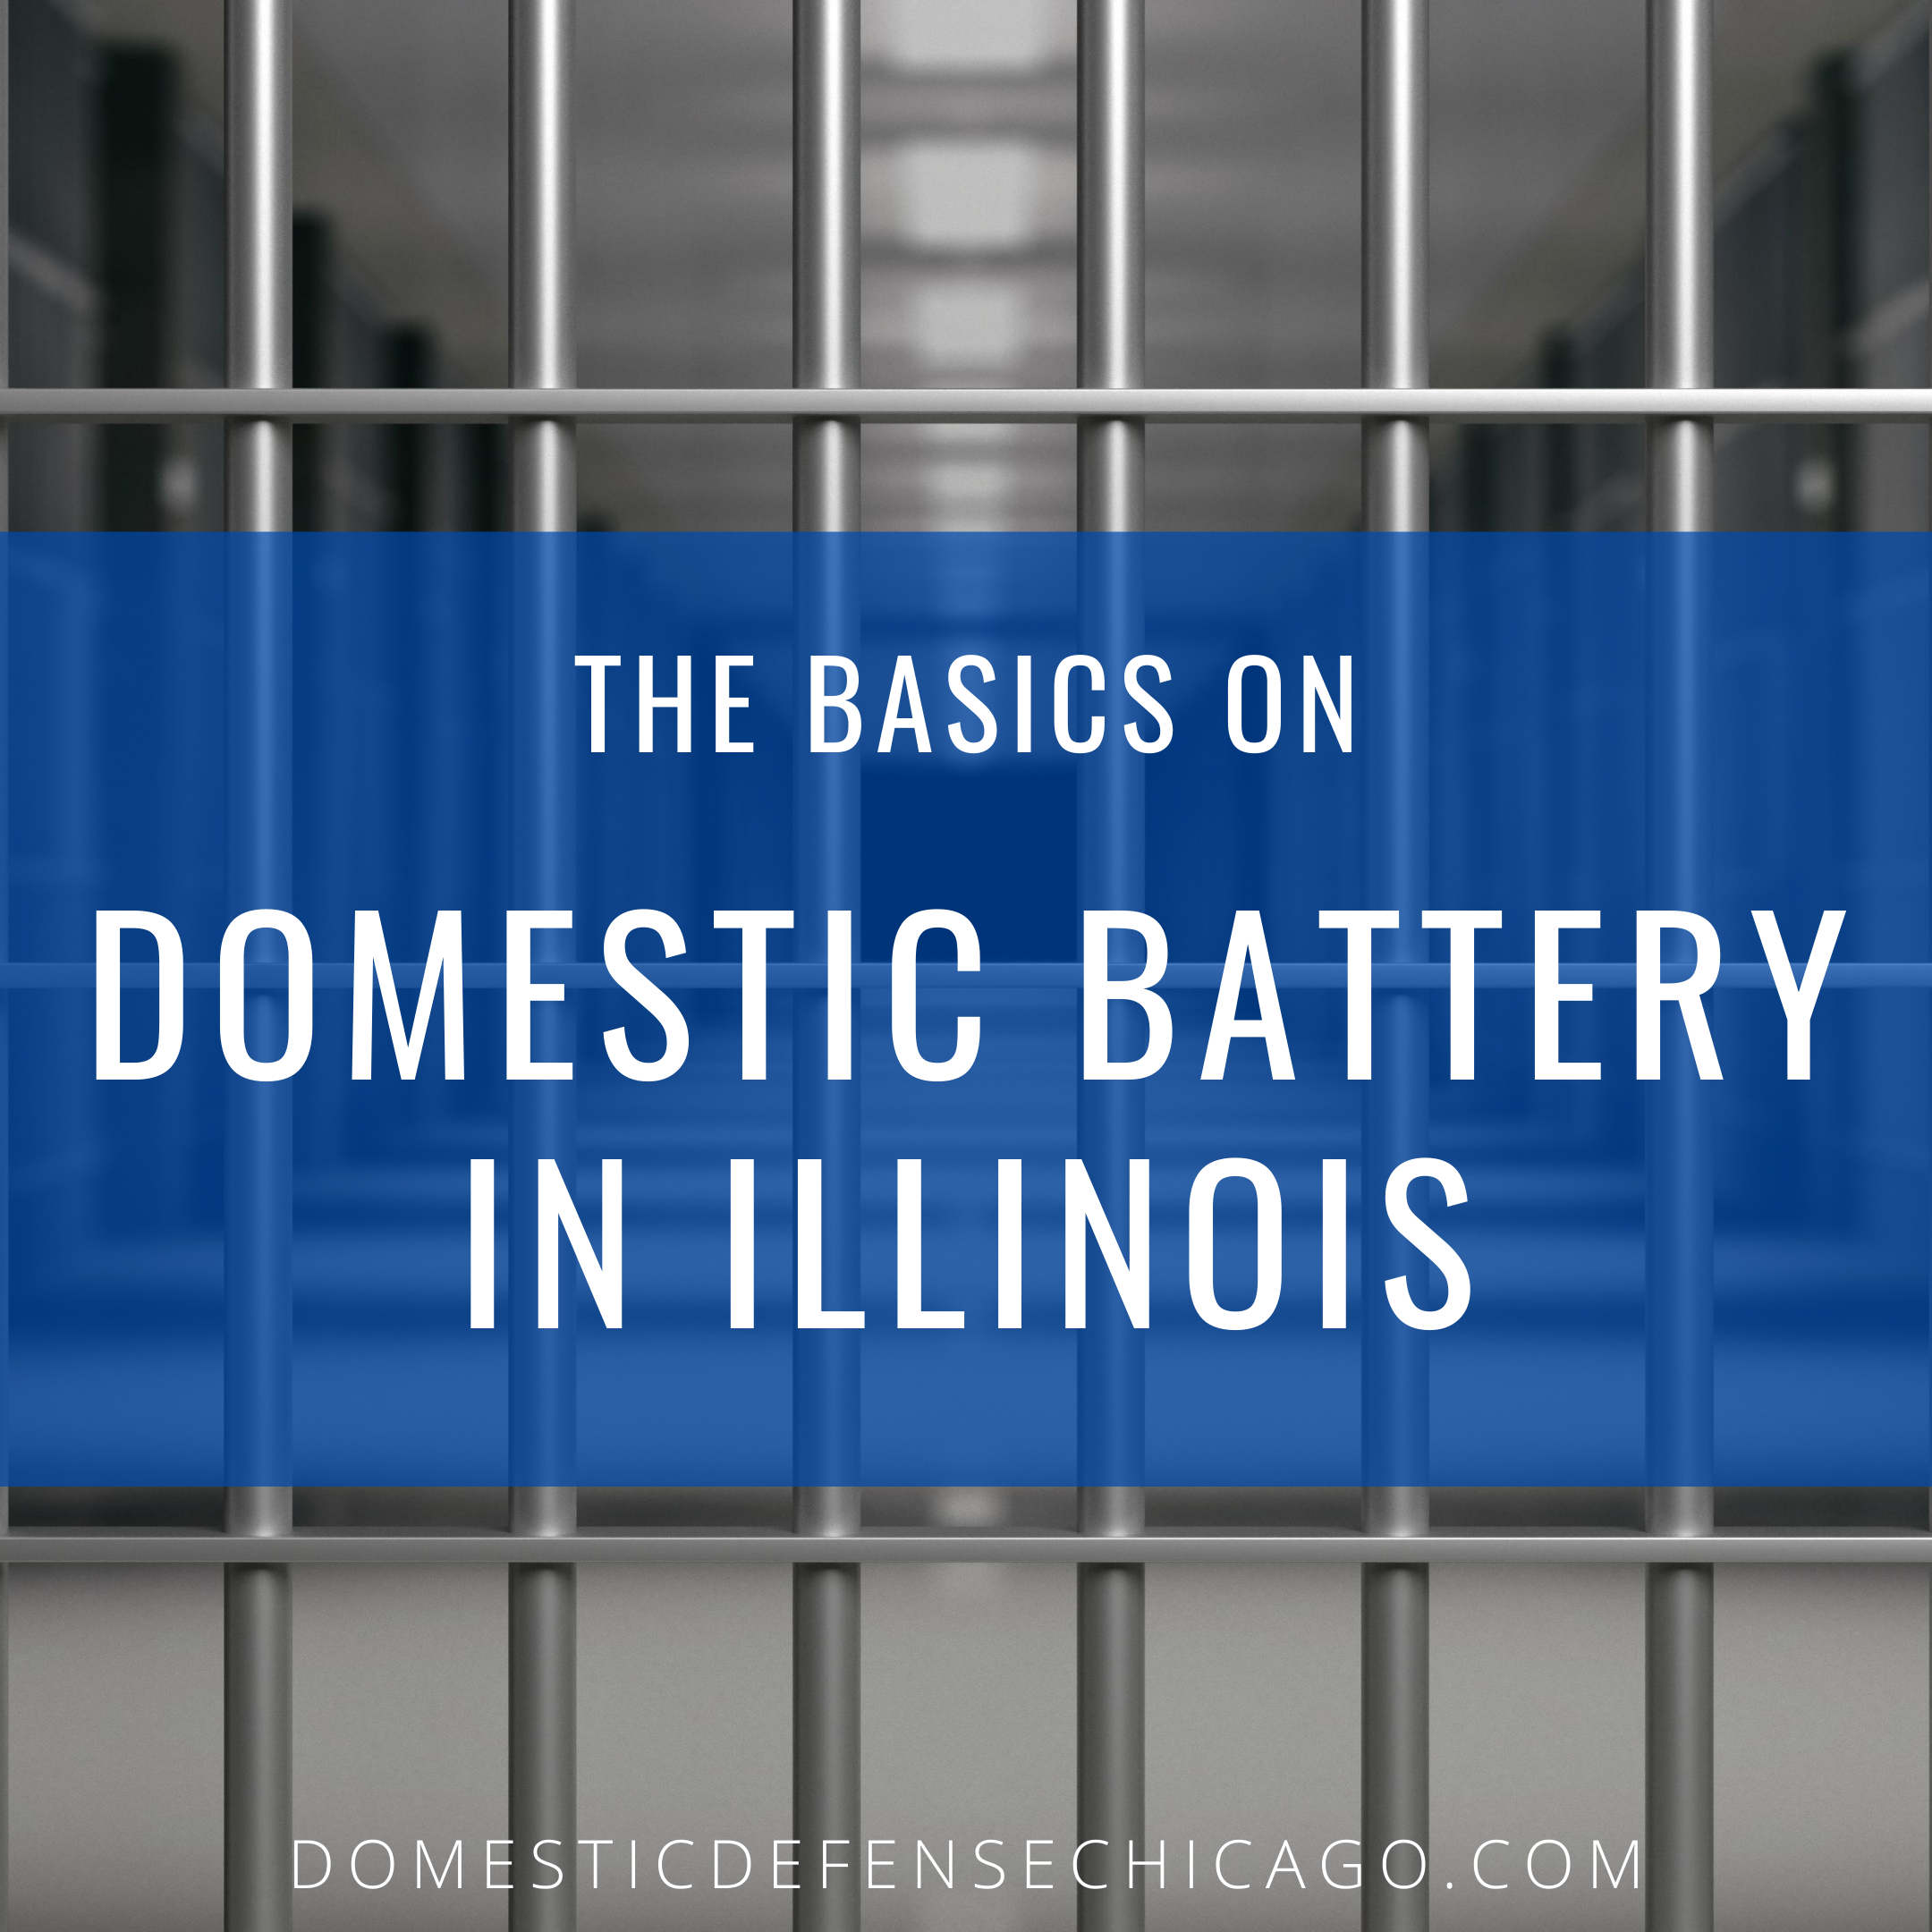 The Basics on Domestic Battery in Illinois